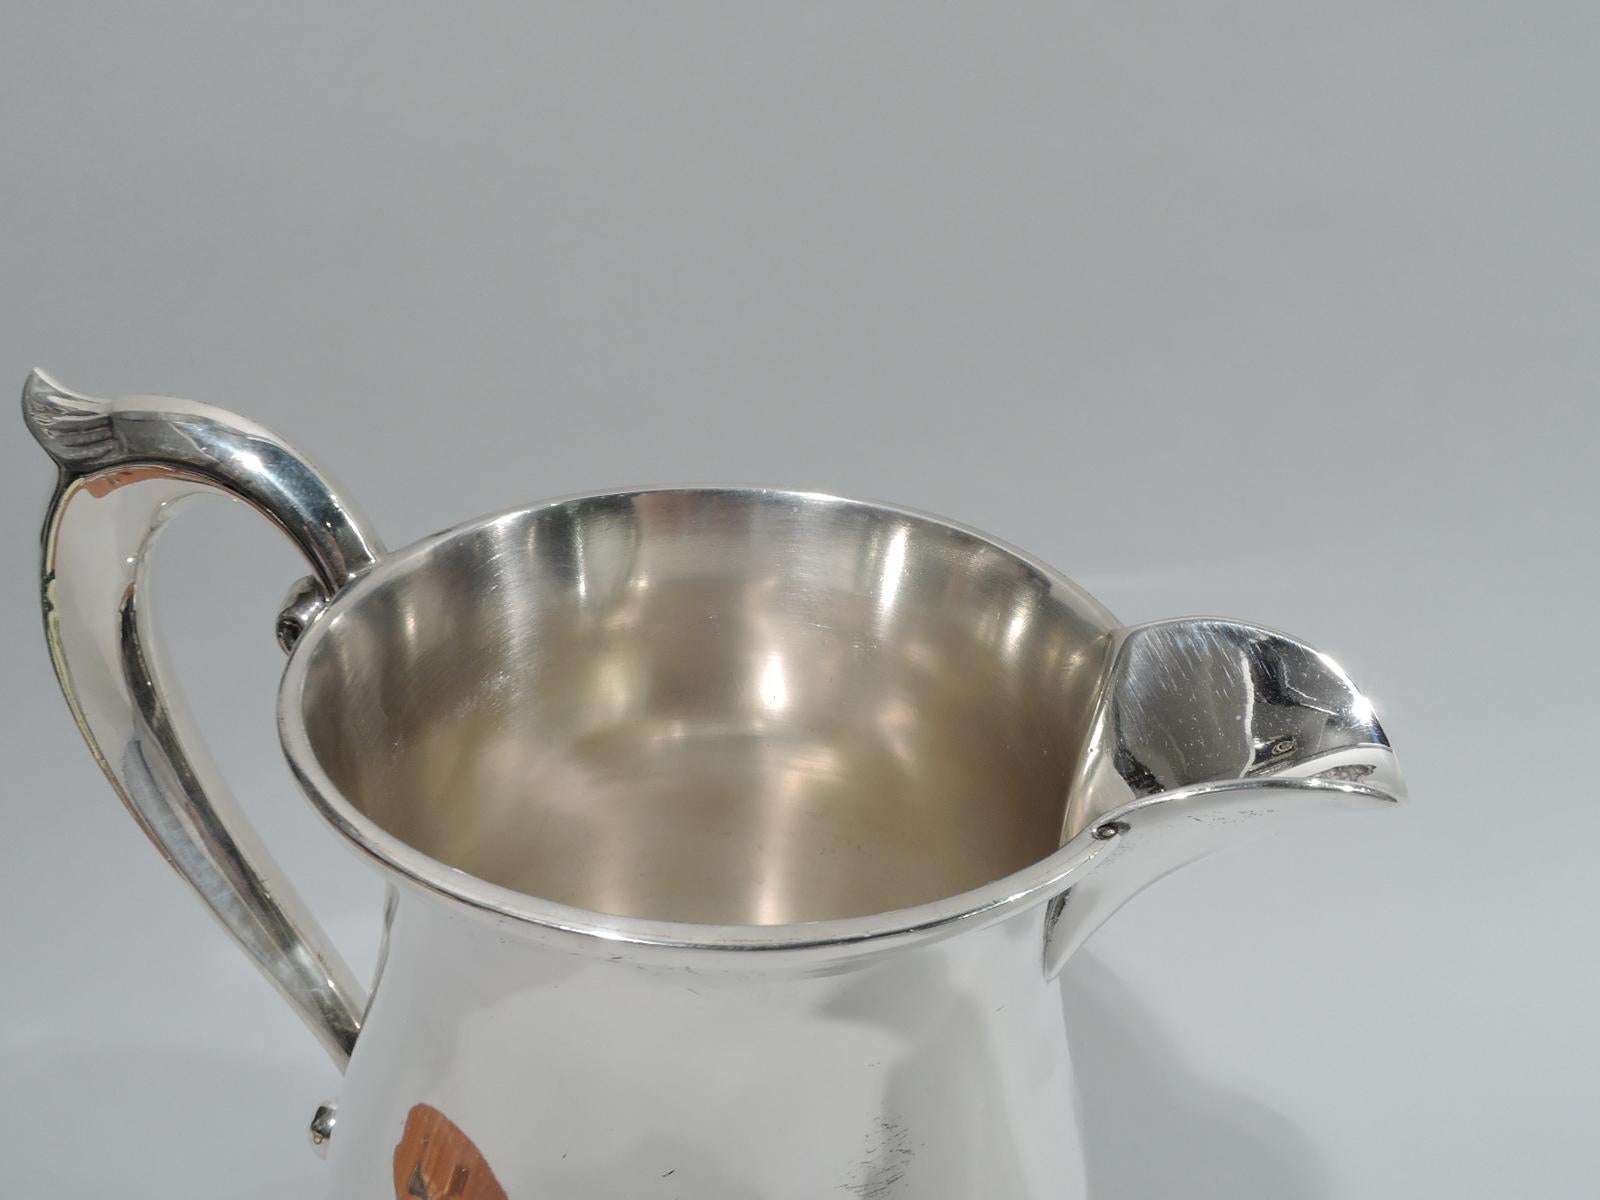 American Colonial-style sterling silver water pitcher, ca 1920. Retailed by Cartier in New York. Baluster body on round stepped foot. Capped s-scroll handle and u-form spout. Marked “Cartier / Sterling / 336”. Heavy weight: 23.5 troy ounces.